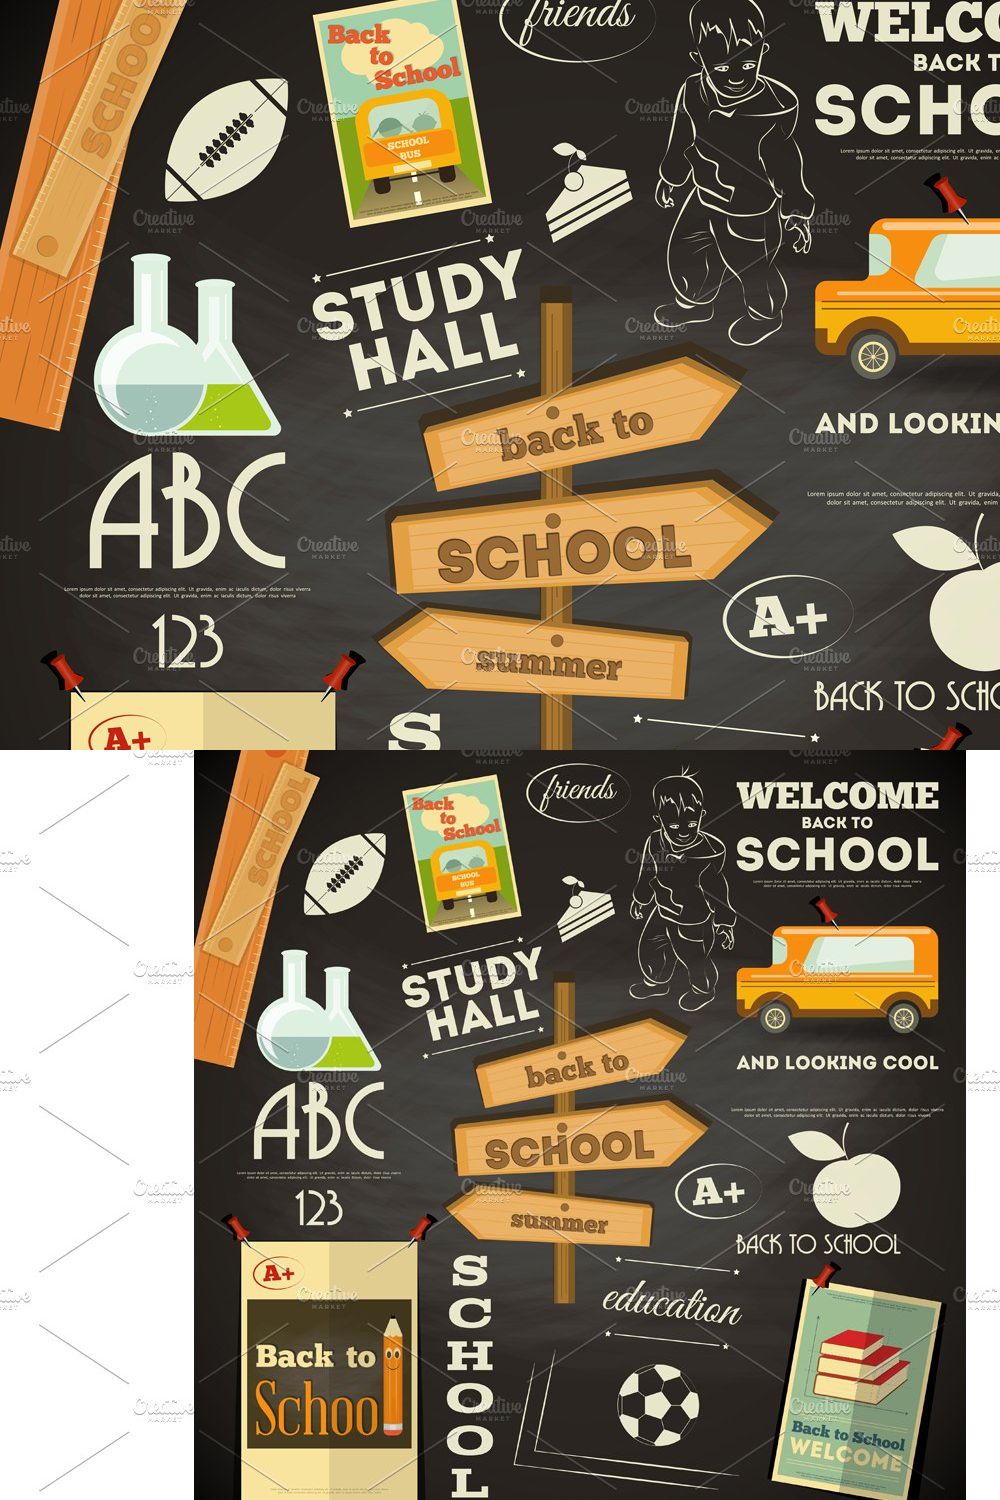 Back to School pinterest preview image.